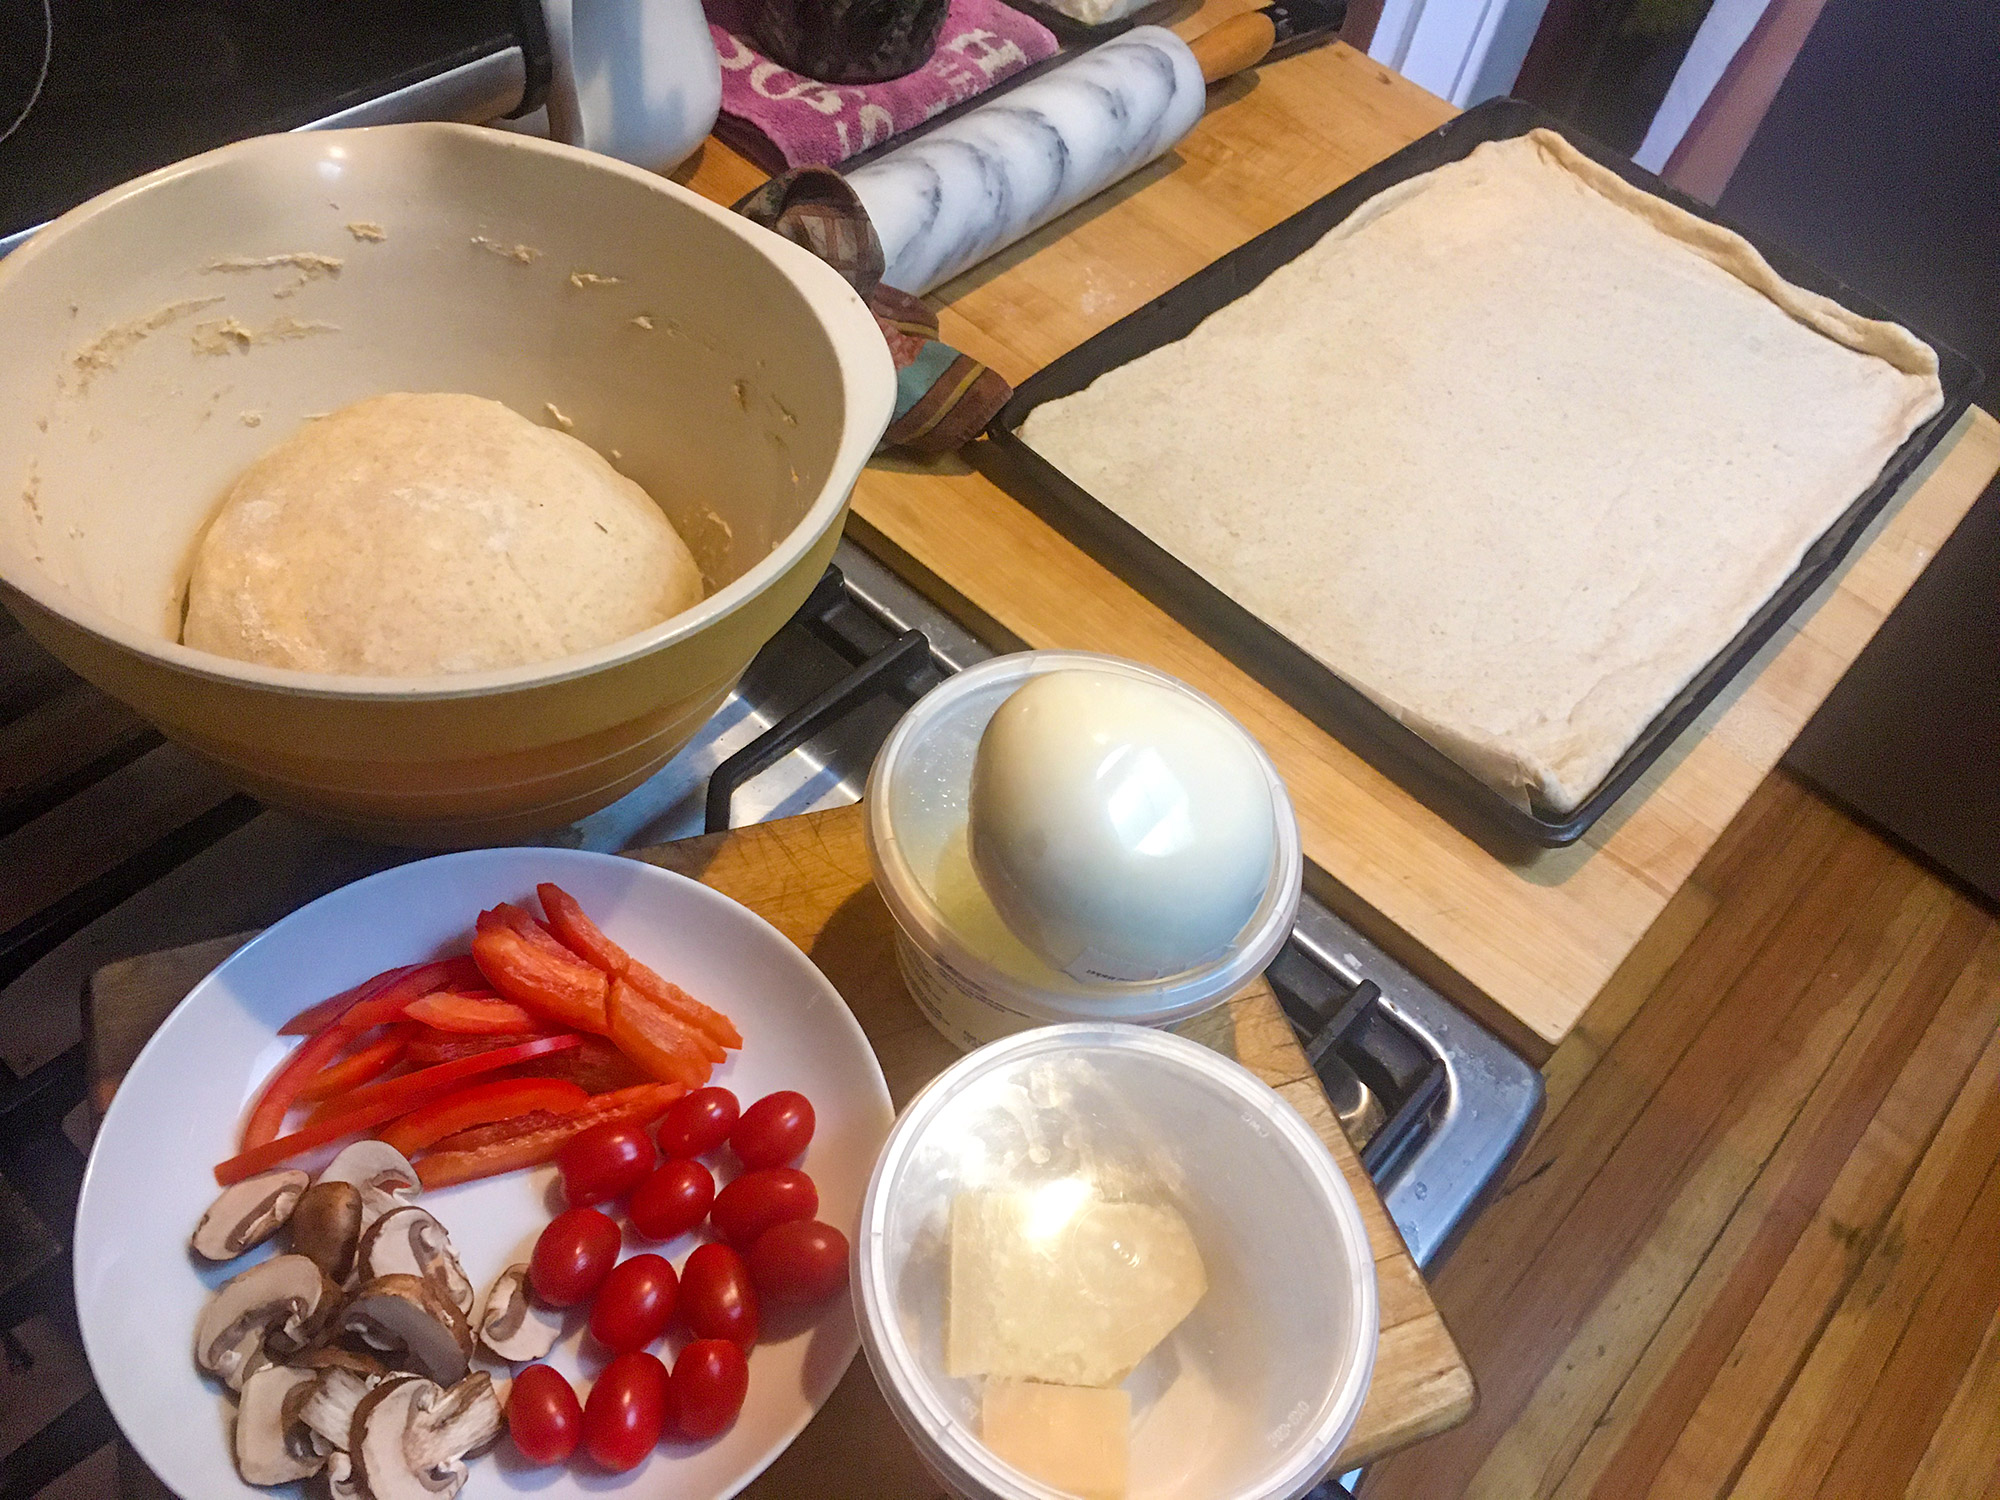 Pizza ingredients and remaining dough